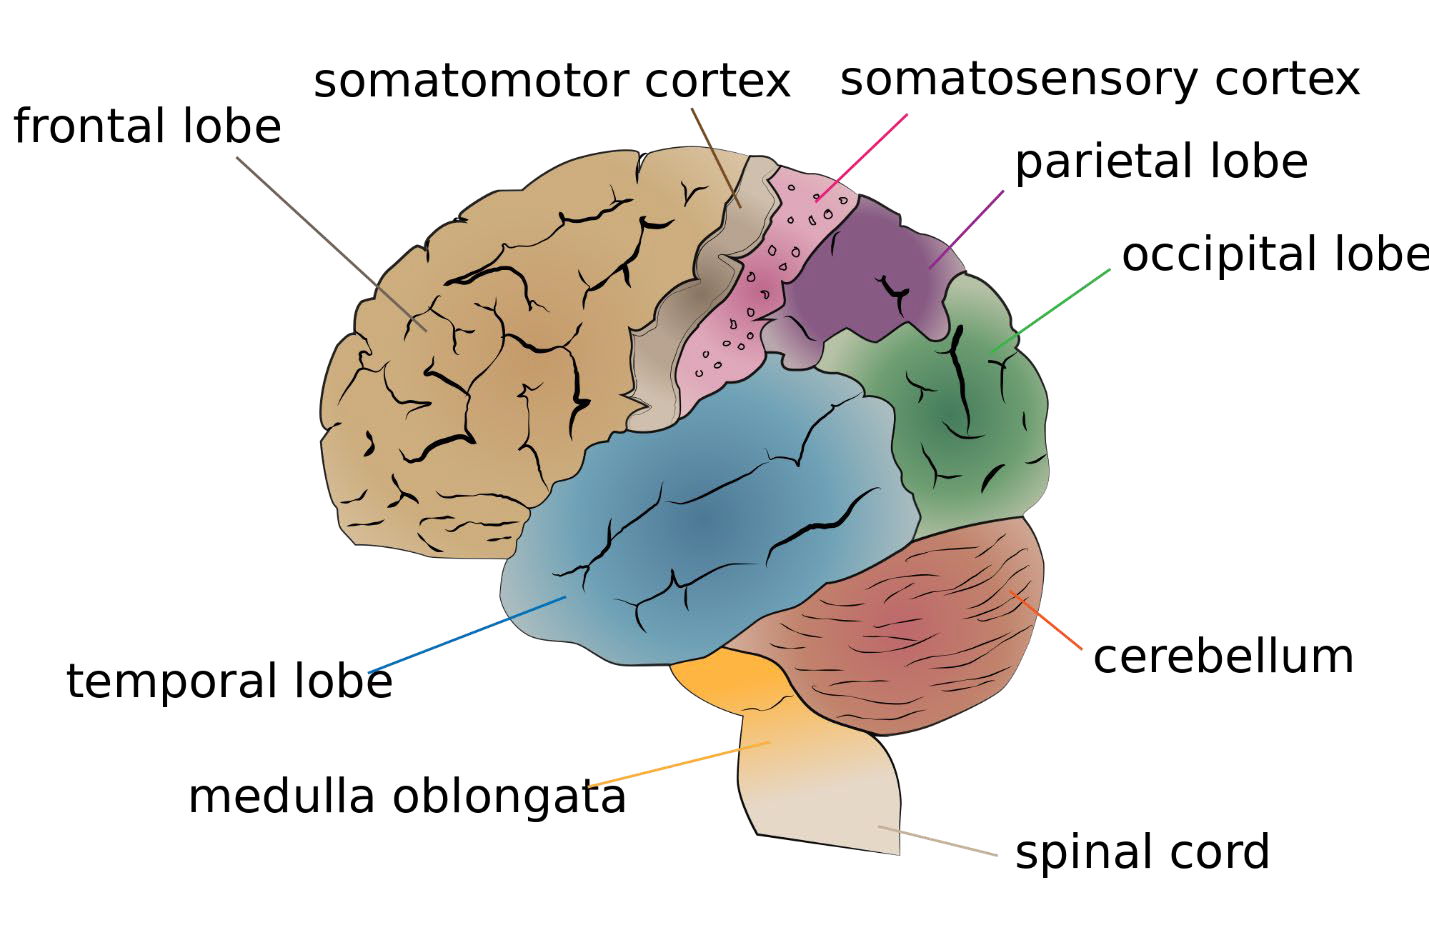 image depicting the 4 lobes of the brain